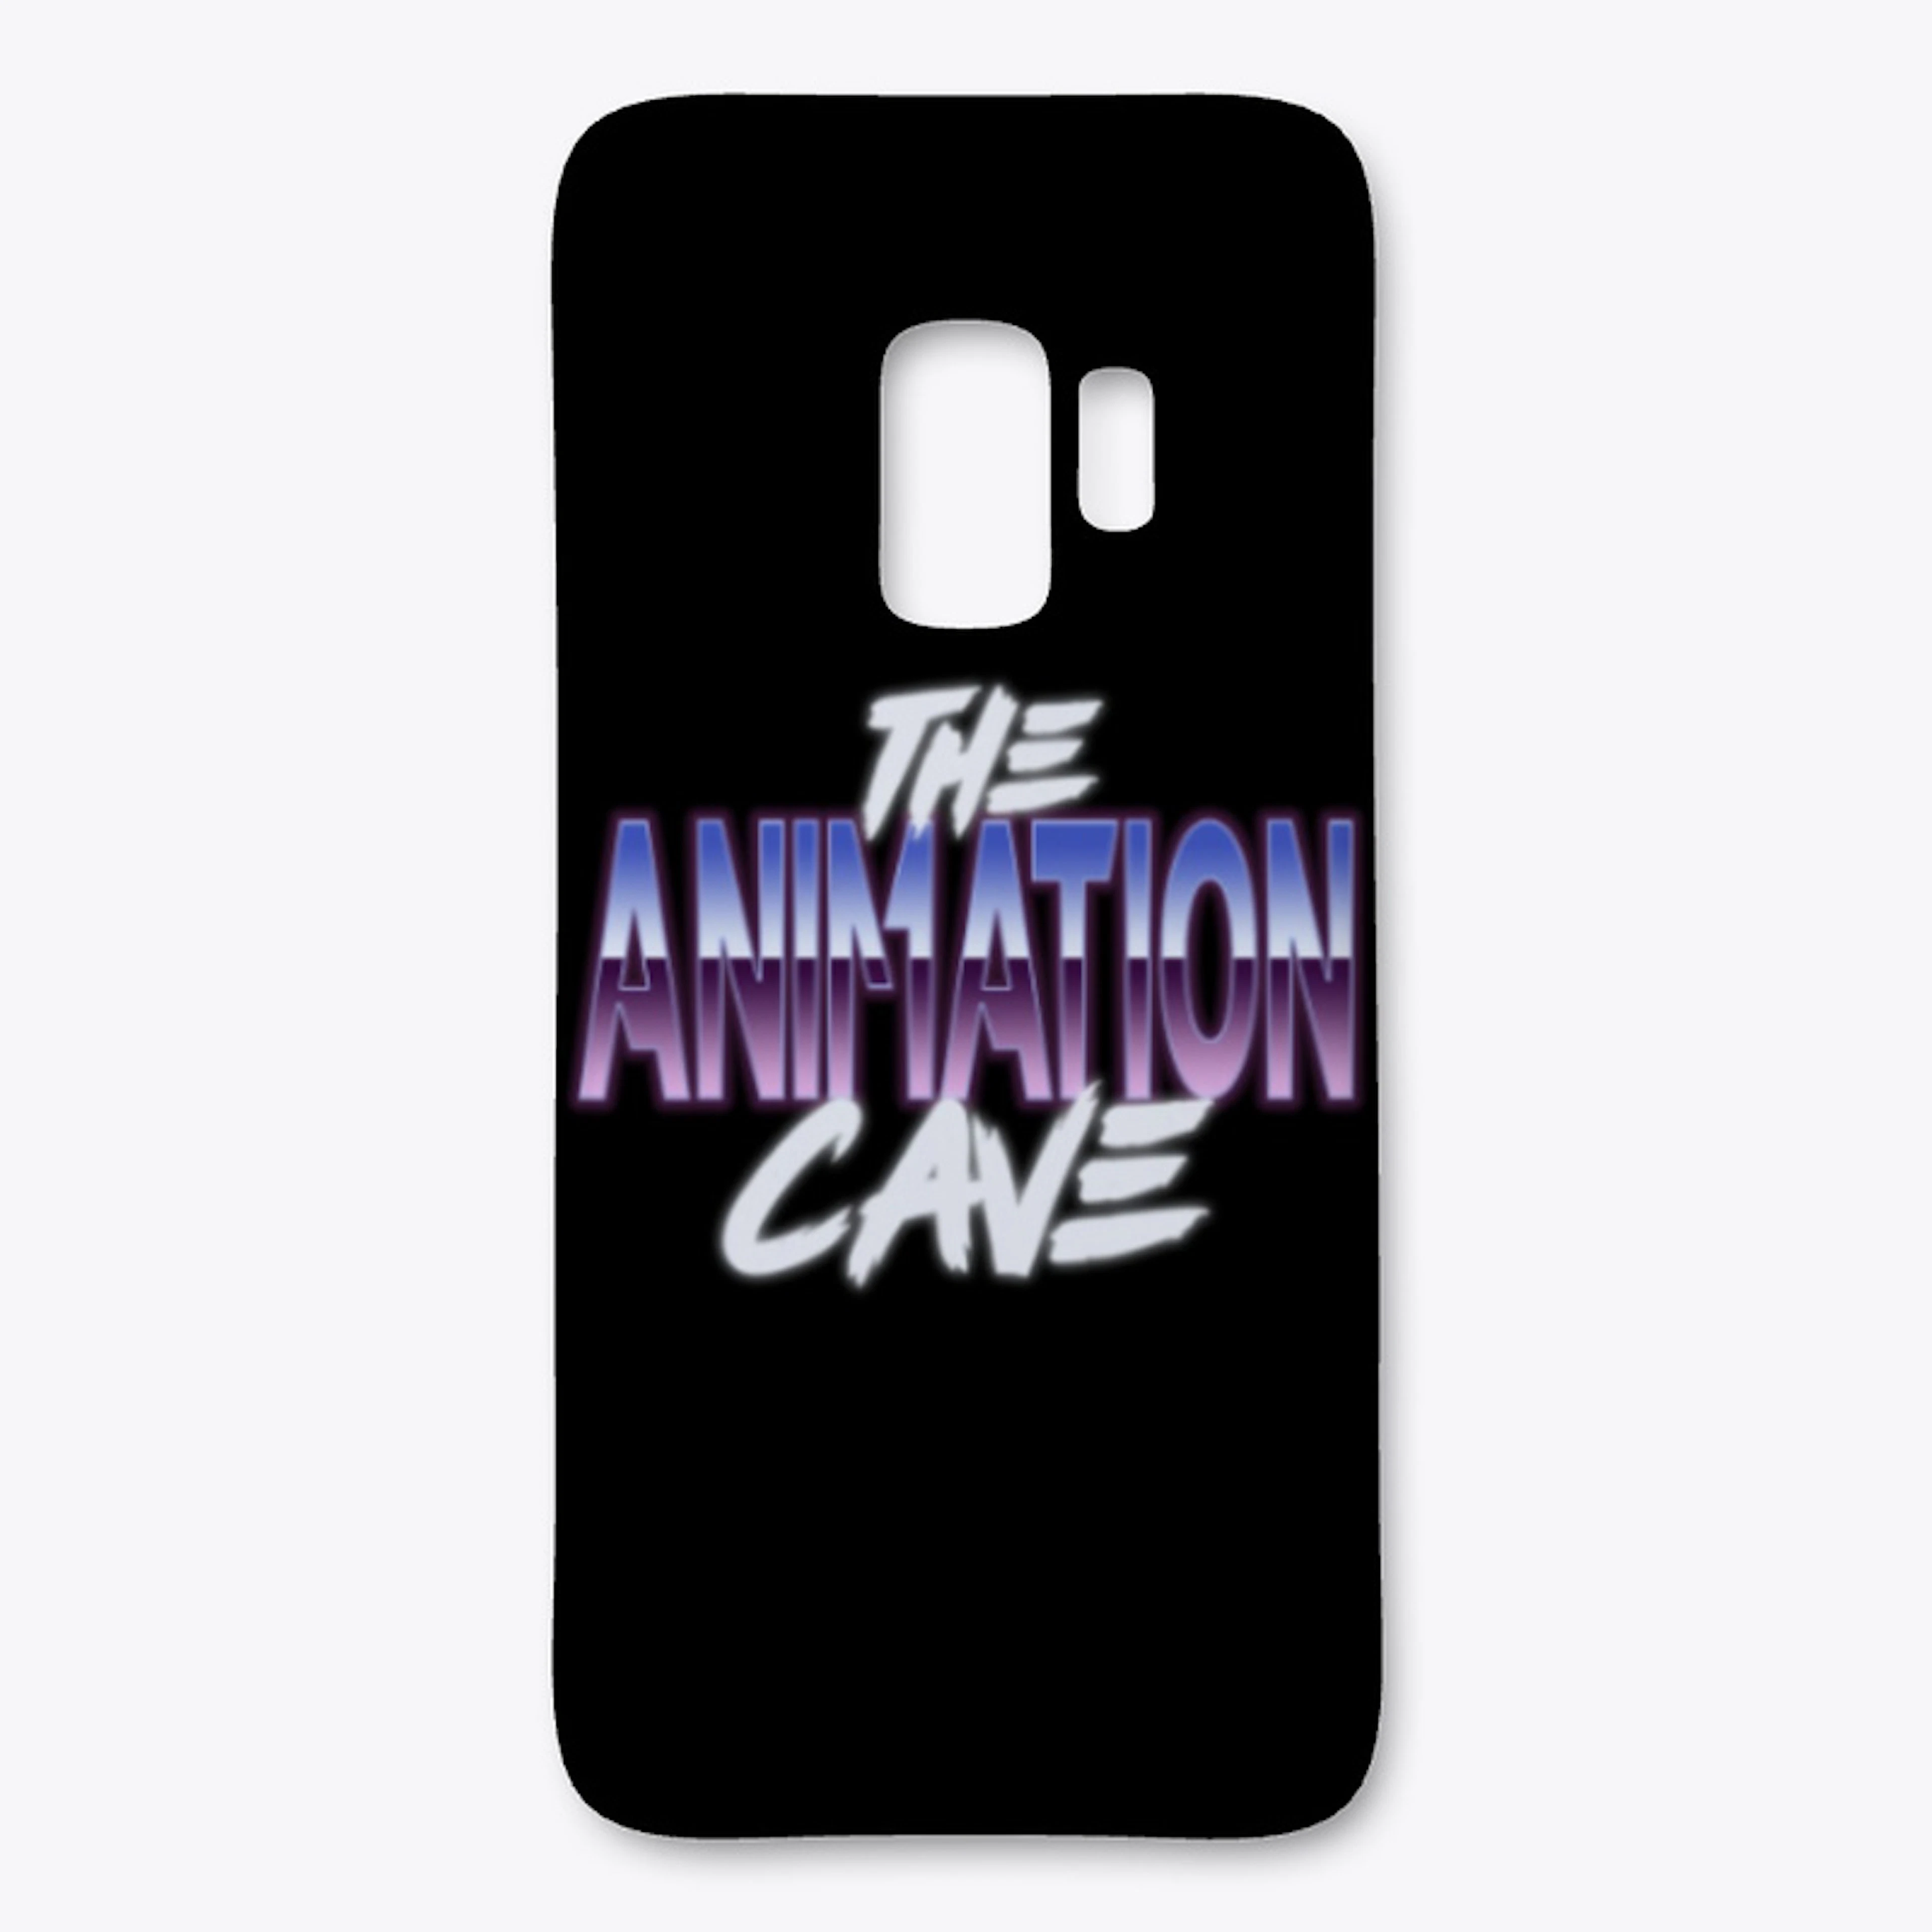 The Animation Cave Merch